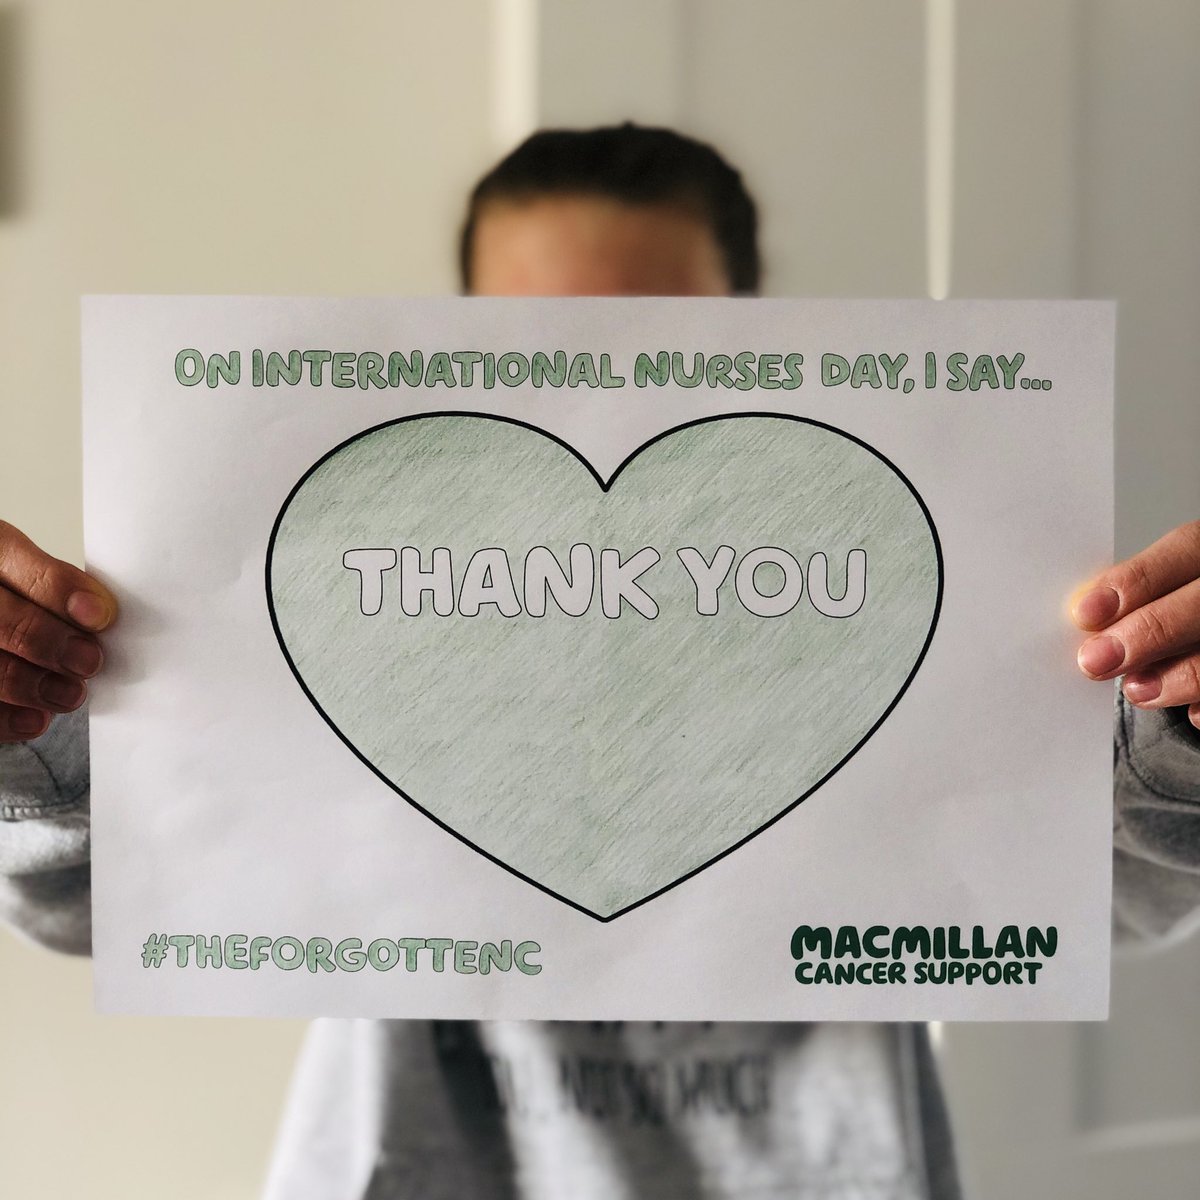 On #InternationalNursesDay I’d like to thank our @macmillancancer nurses @BSUH_NHS supporting all patient on the wards and off during covid 💚
#TheForgottenC
macmillan.org.uk/assets/thank-y…